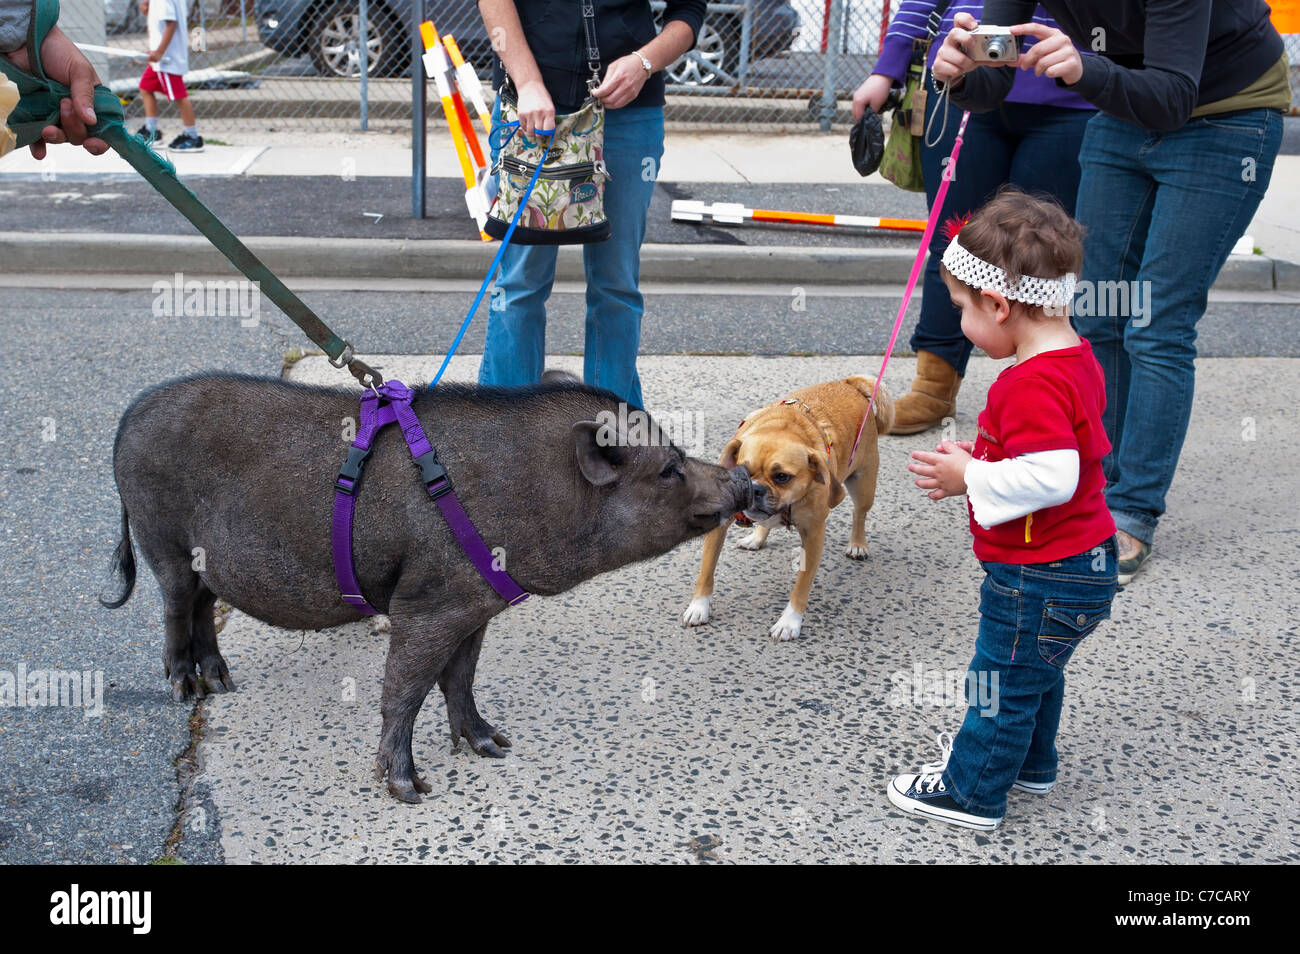 pet-pot-bellied-pig-dog-and-toddler-young-girl-staring-at-each-other-C7CARY.jpg